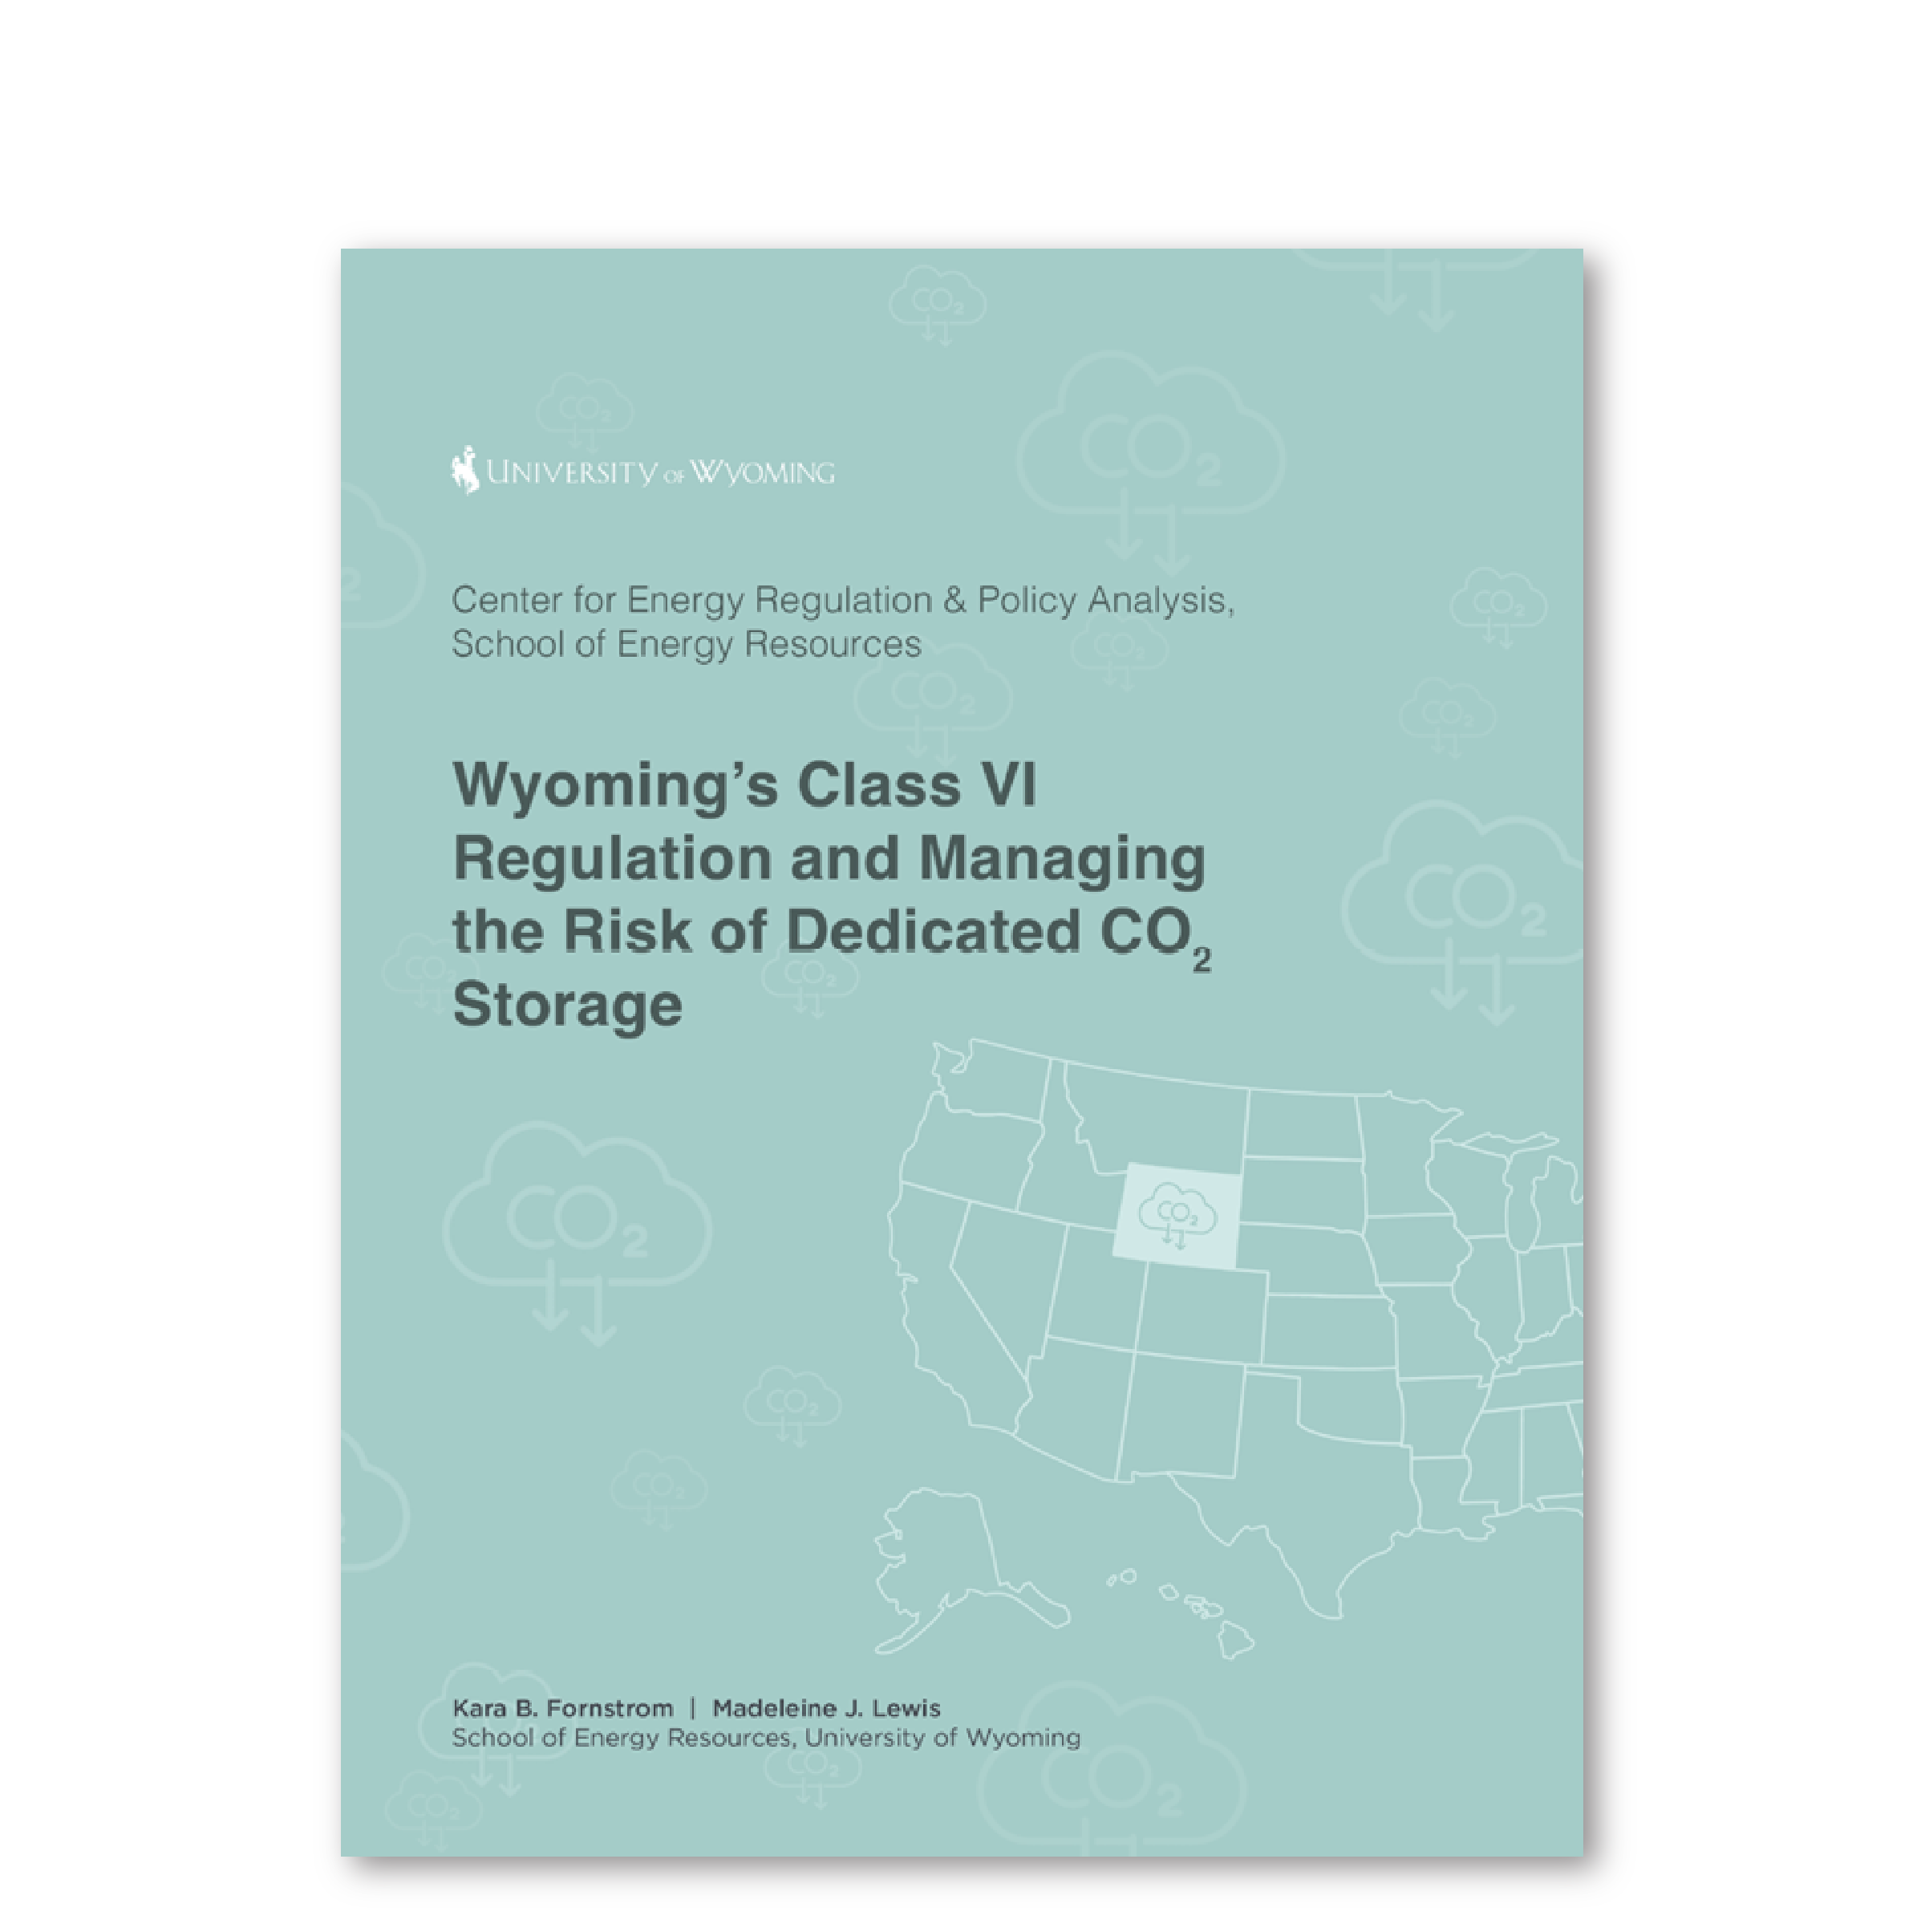 Wyoming’s Class VI Regulation and Managing the Risk of Dedicated CO2 Storage